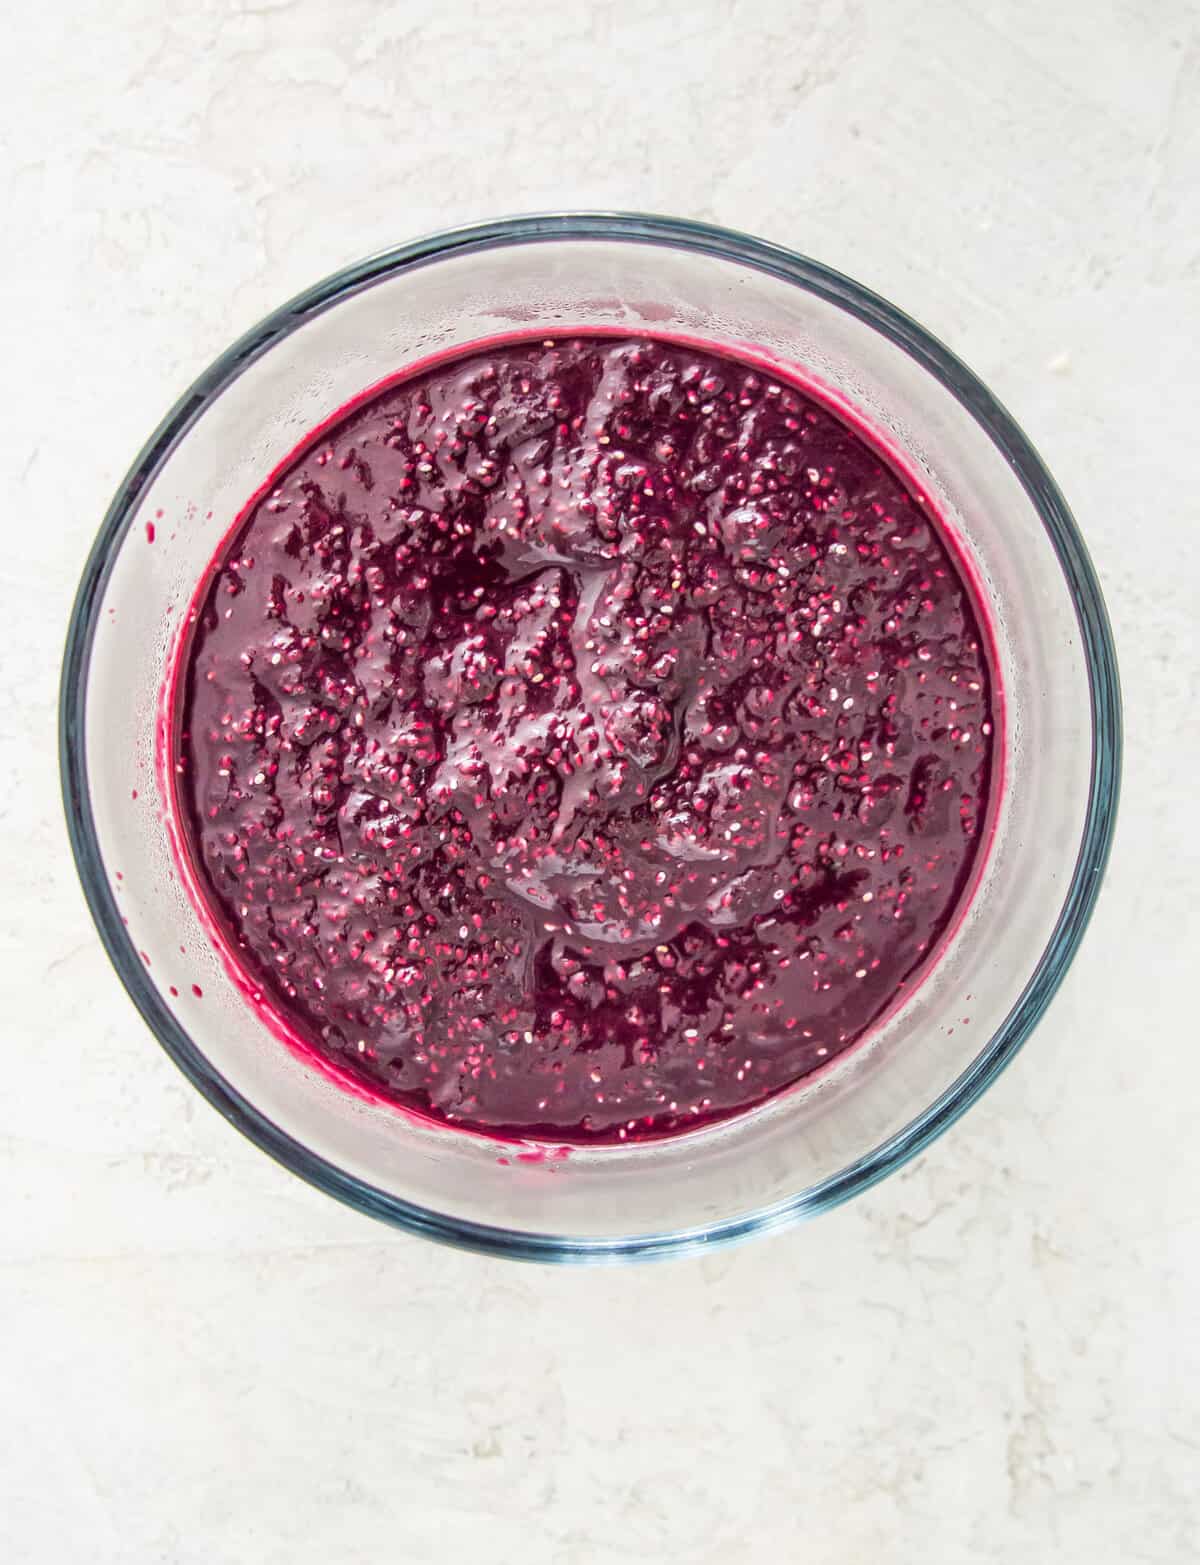 Blueberry chia seed jam in a clear bowl.